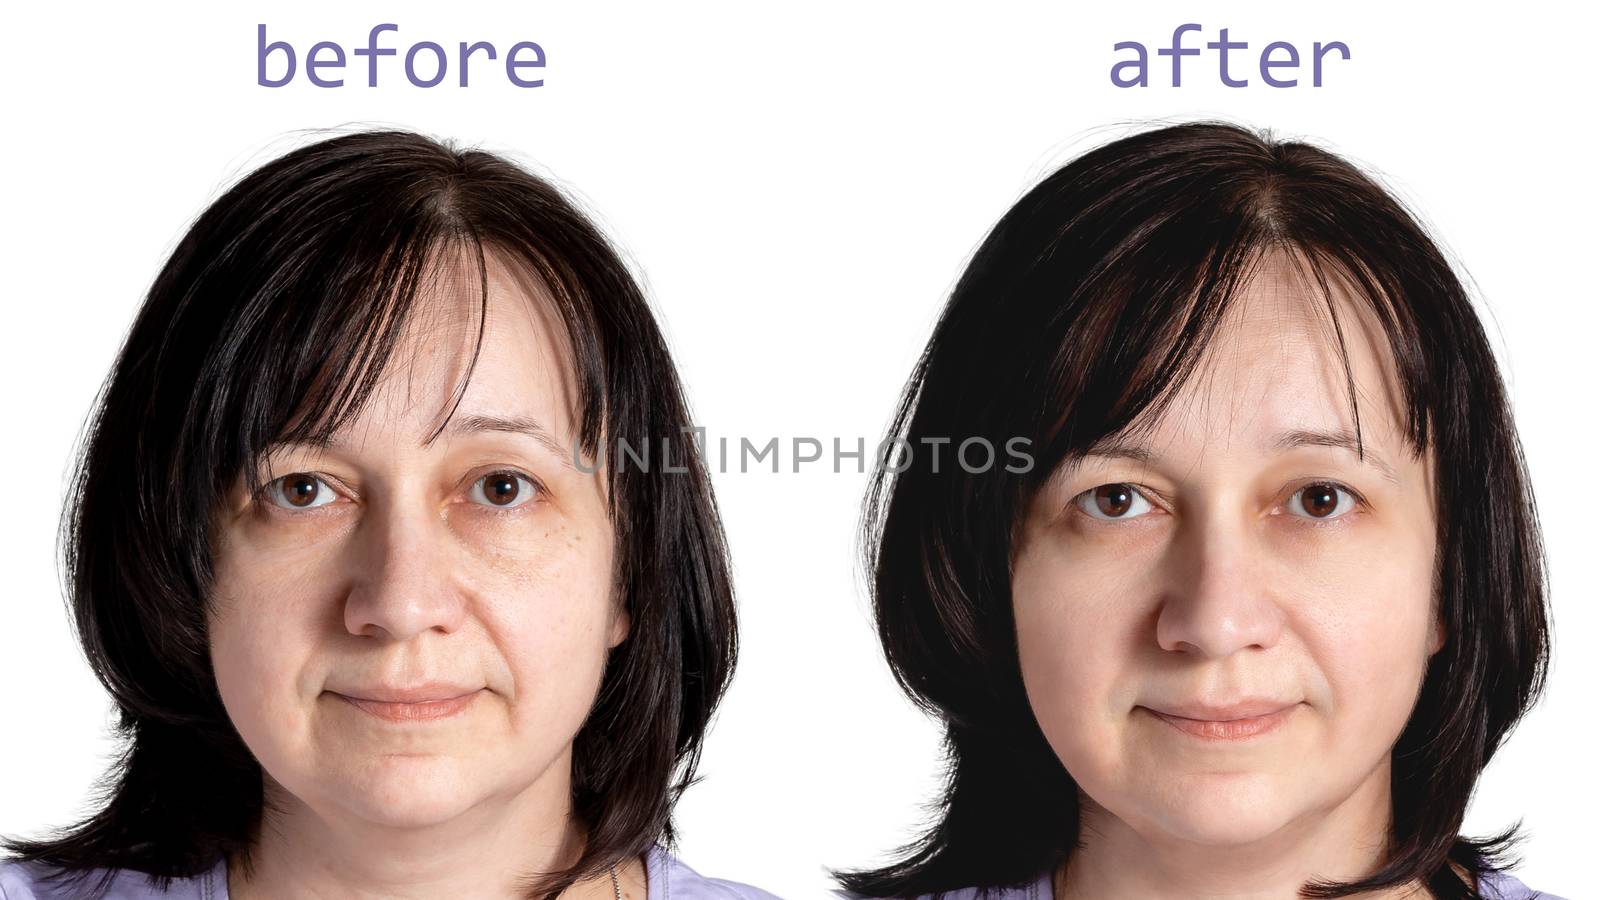 Face of a mature woman with dark hair before and after cosmetic rejuvenating procedures, isolated on white background by galsand